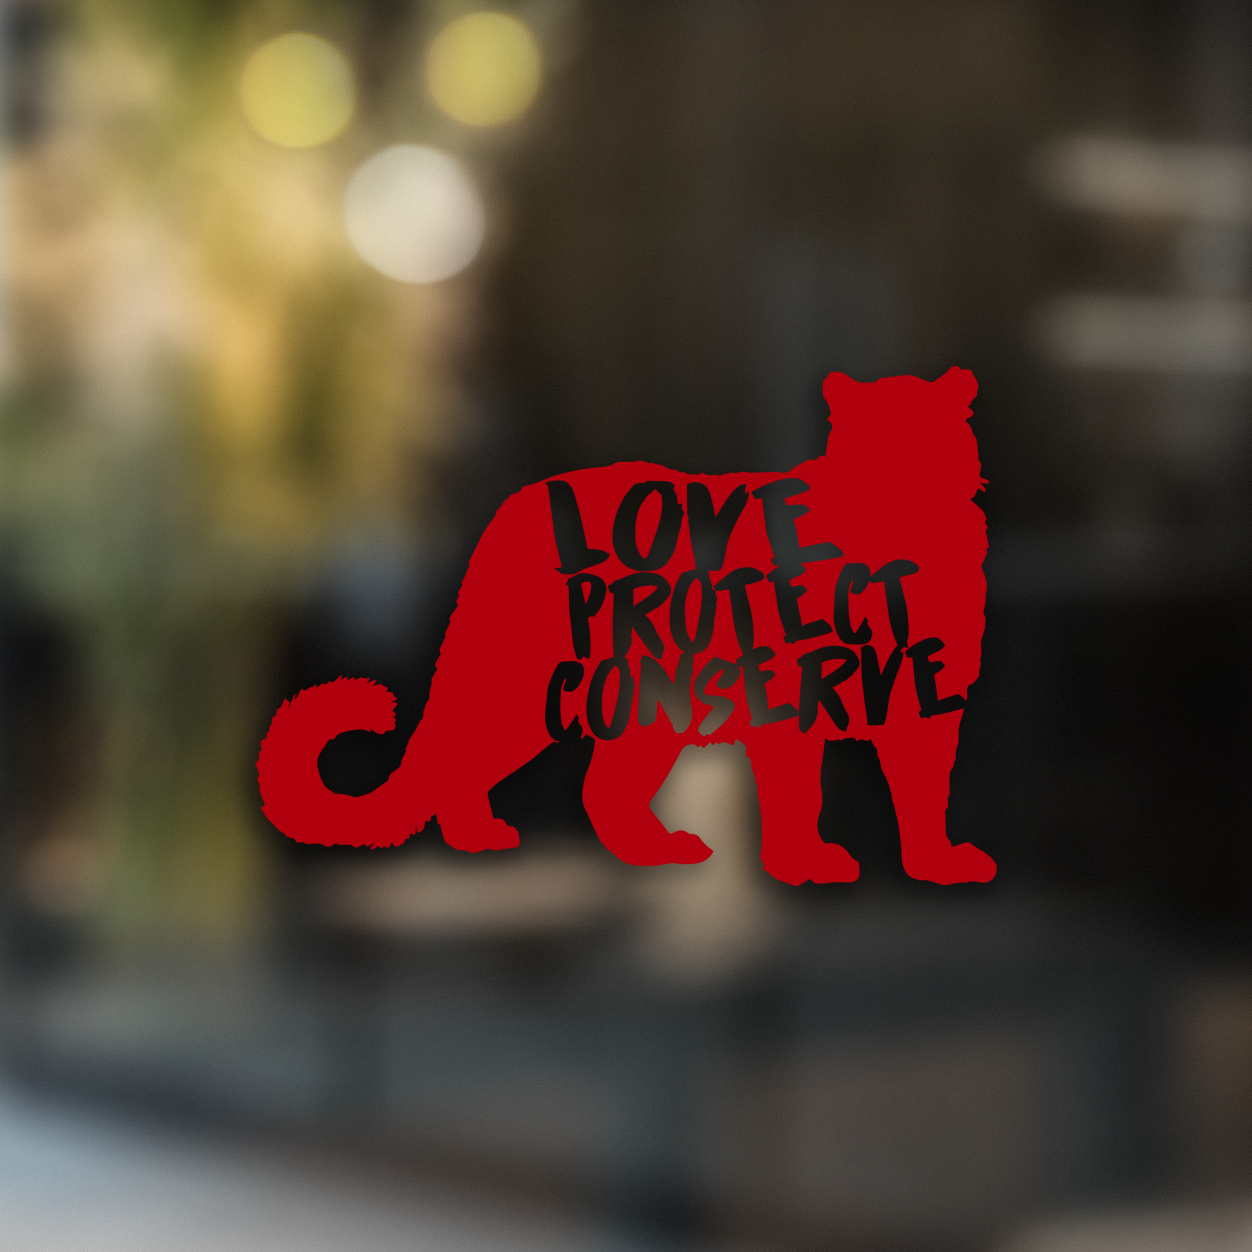 Love Protect Conserve Snow Leopard - Decal - Animals Anonymous Apparel